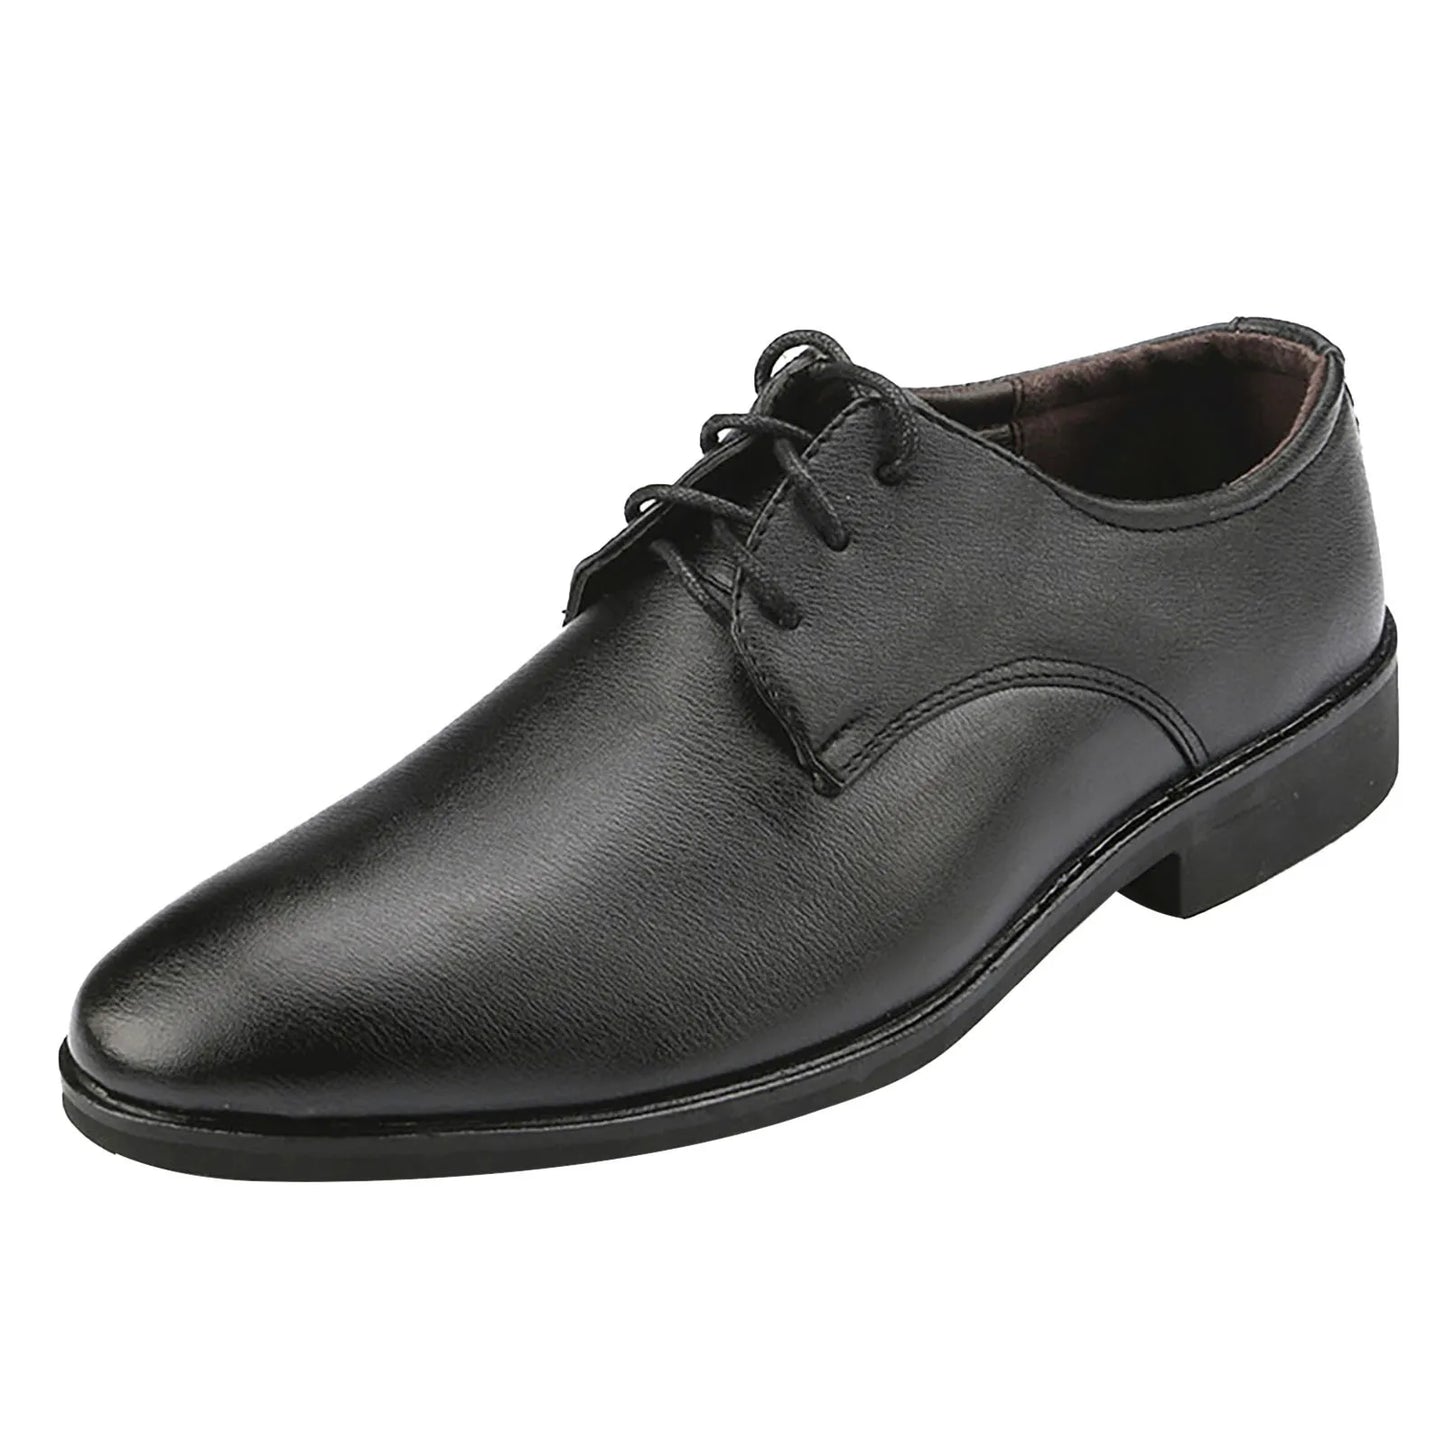 Men Shoes New Fashion Black Formal Party Slip-On Dress Leather Shoes Mens fashion Designer Business Casual Loafers